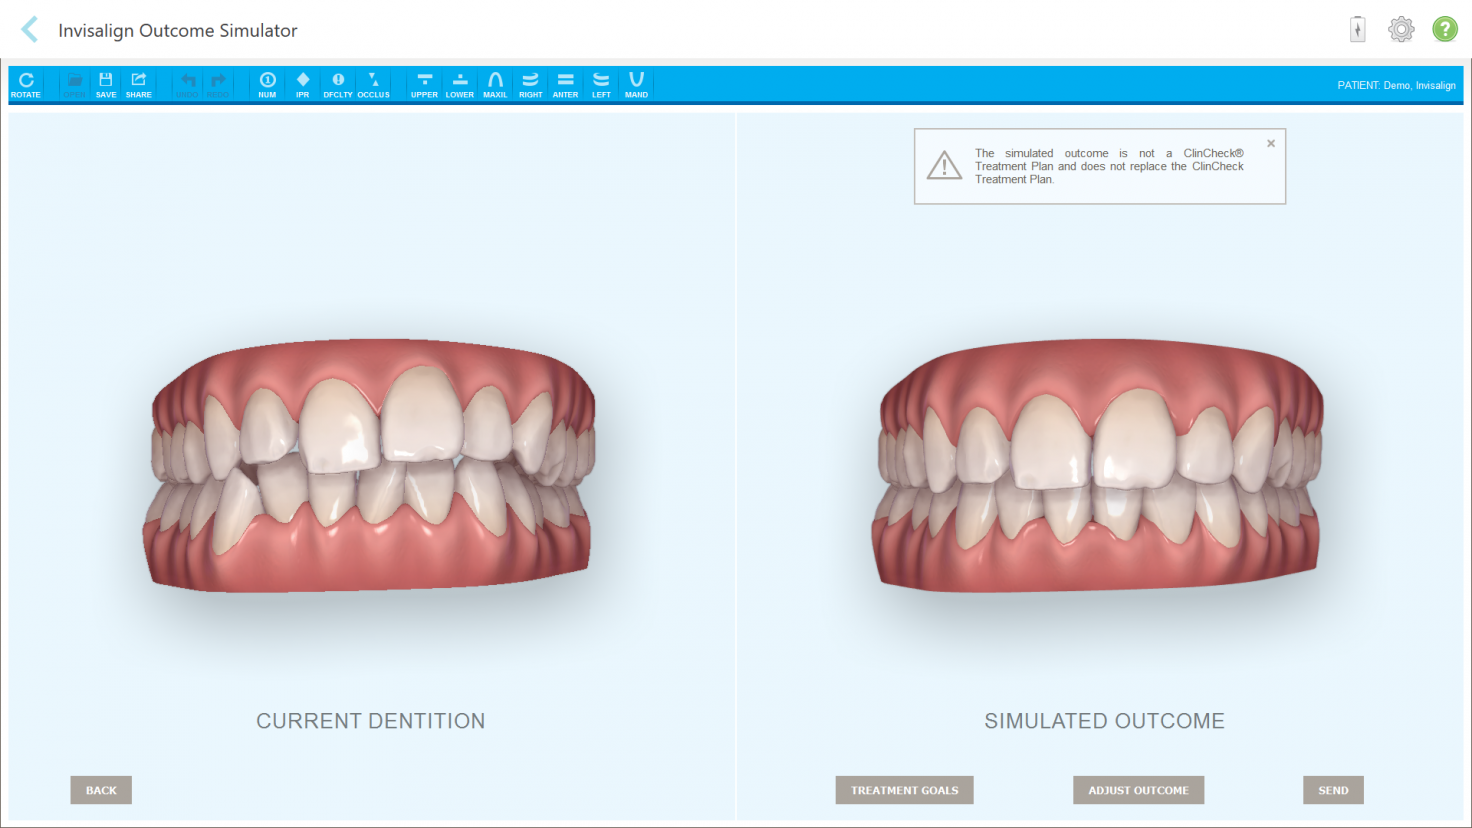 The on-screen view of a patient's teeth using the iTero Element 5D intraoral scanner shows how the Invisalign Outcome Simulator simulates the outcome of treatment.